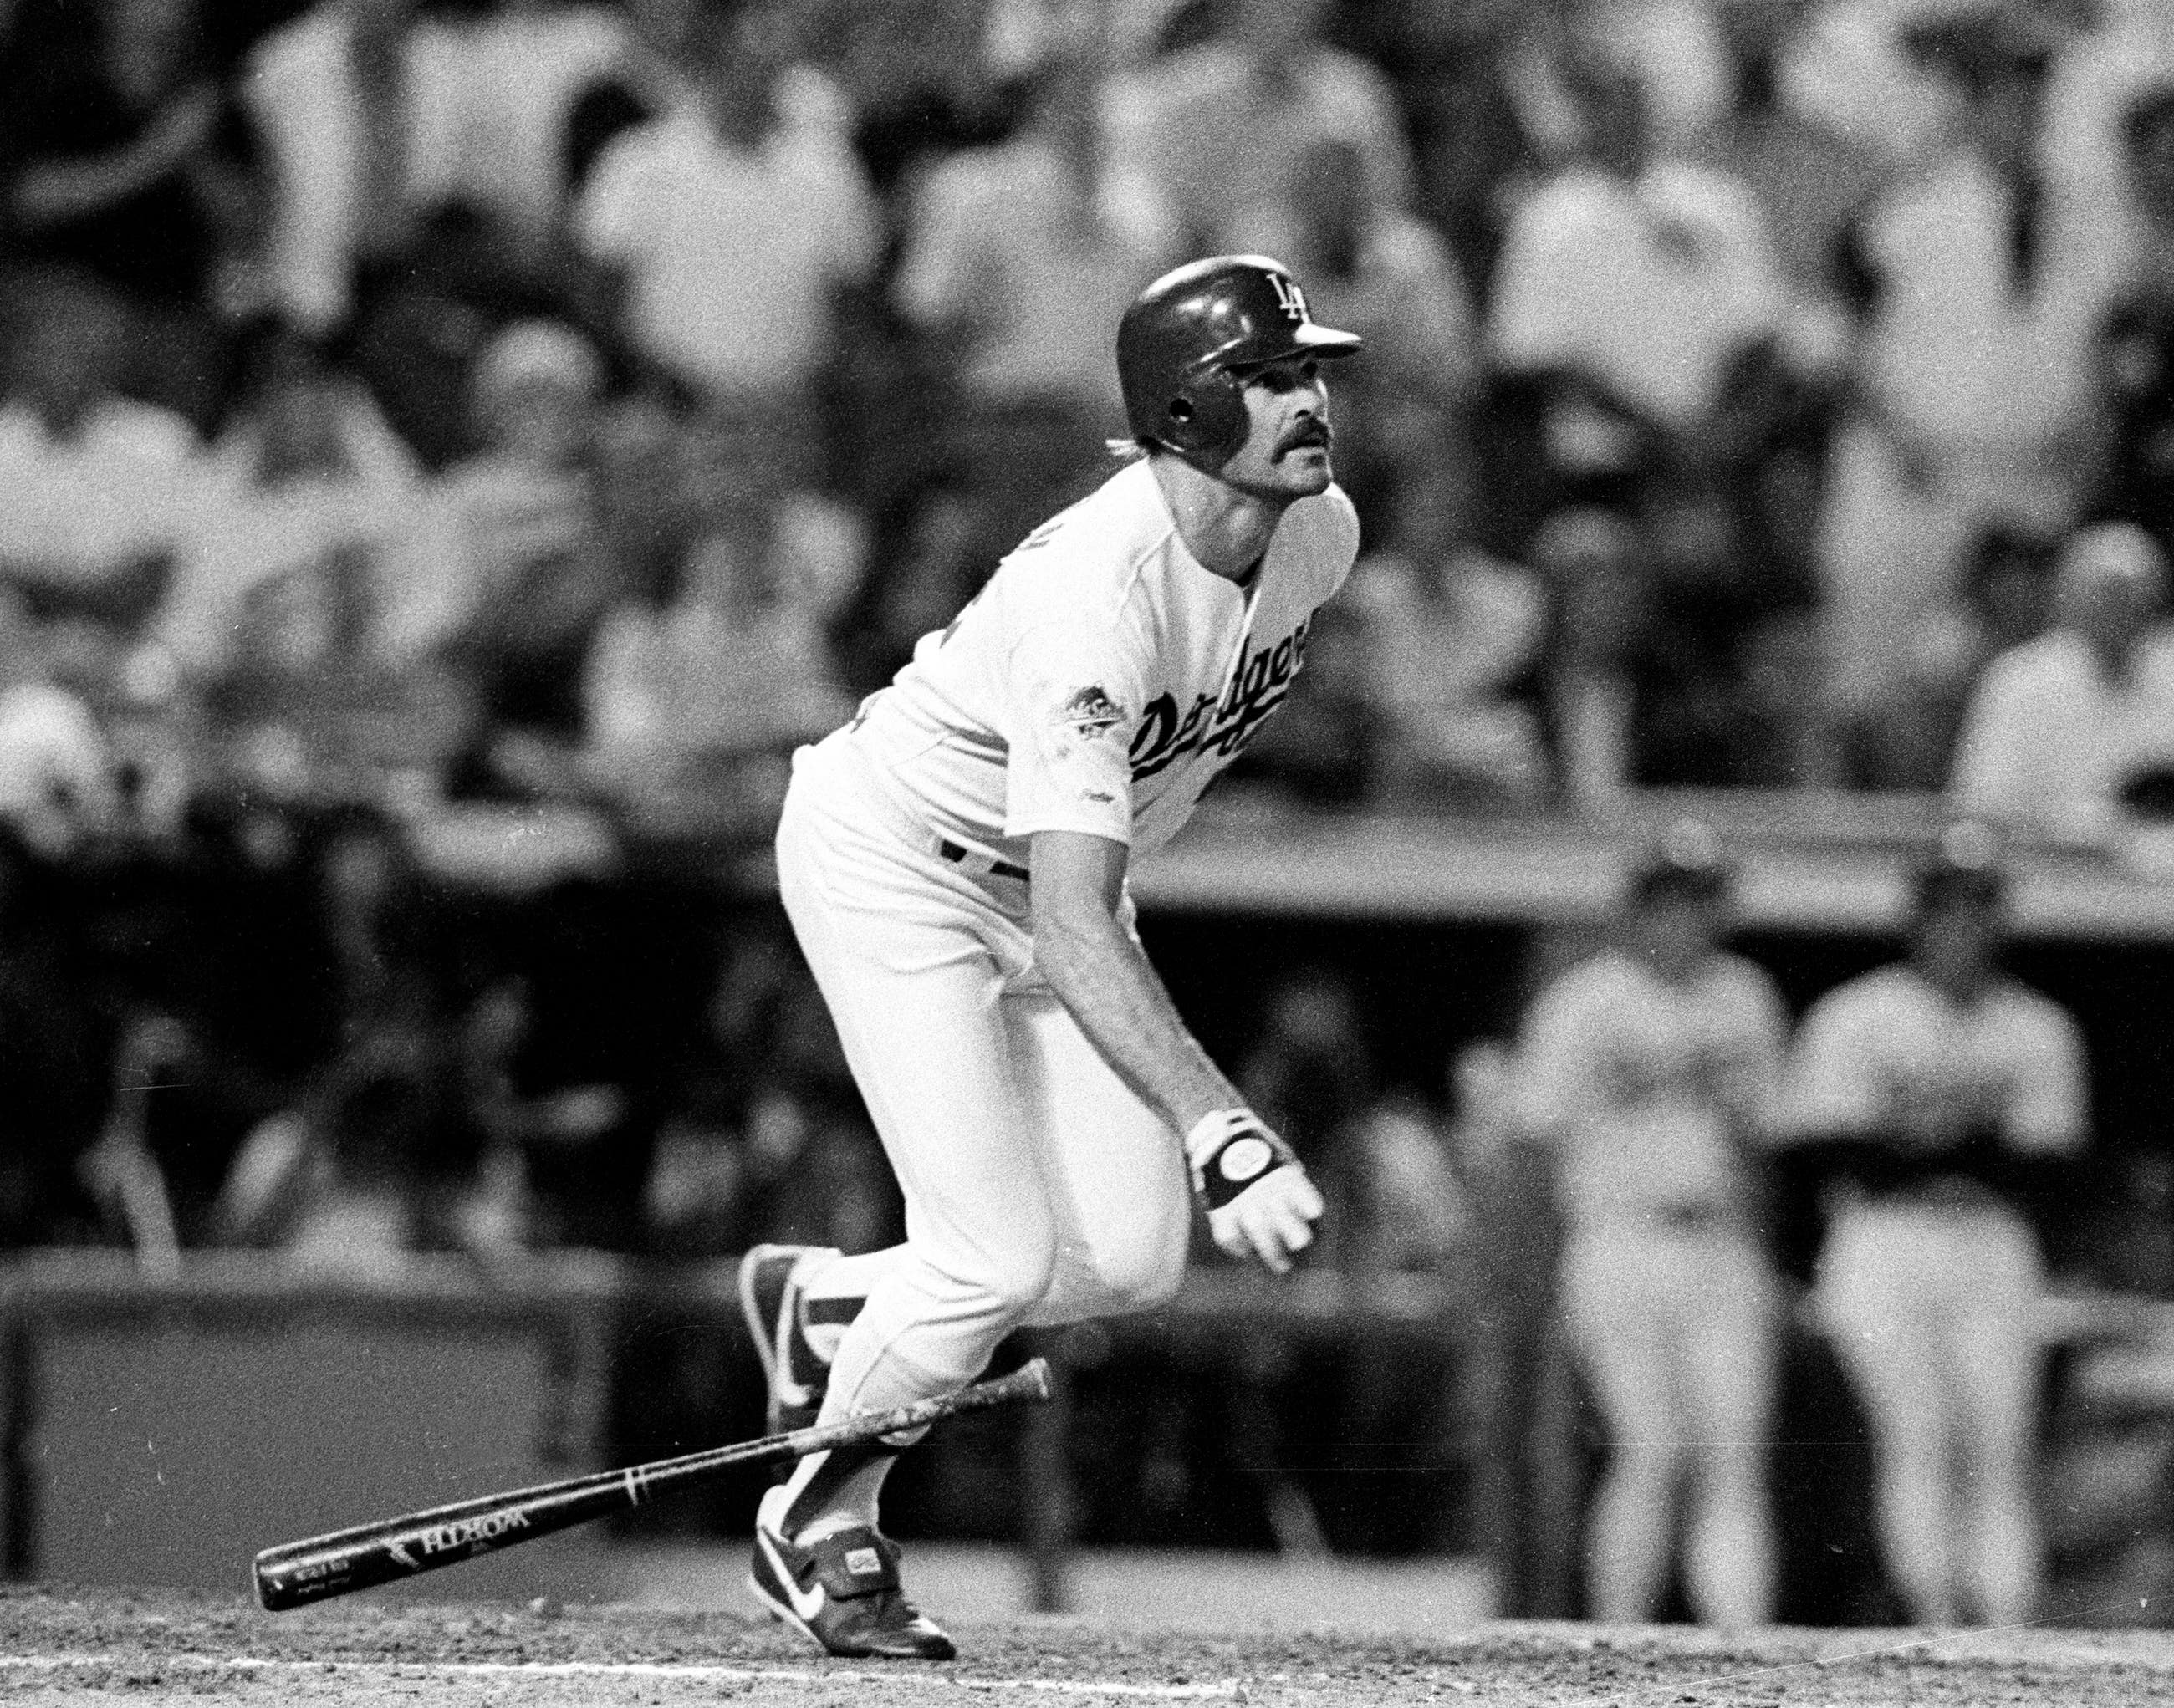 Kirk Gibson's iconic home run in Game 1 of the 1988 World Series at Dodger Stadium